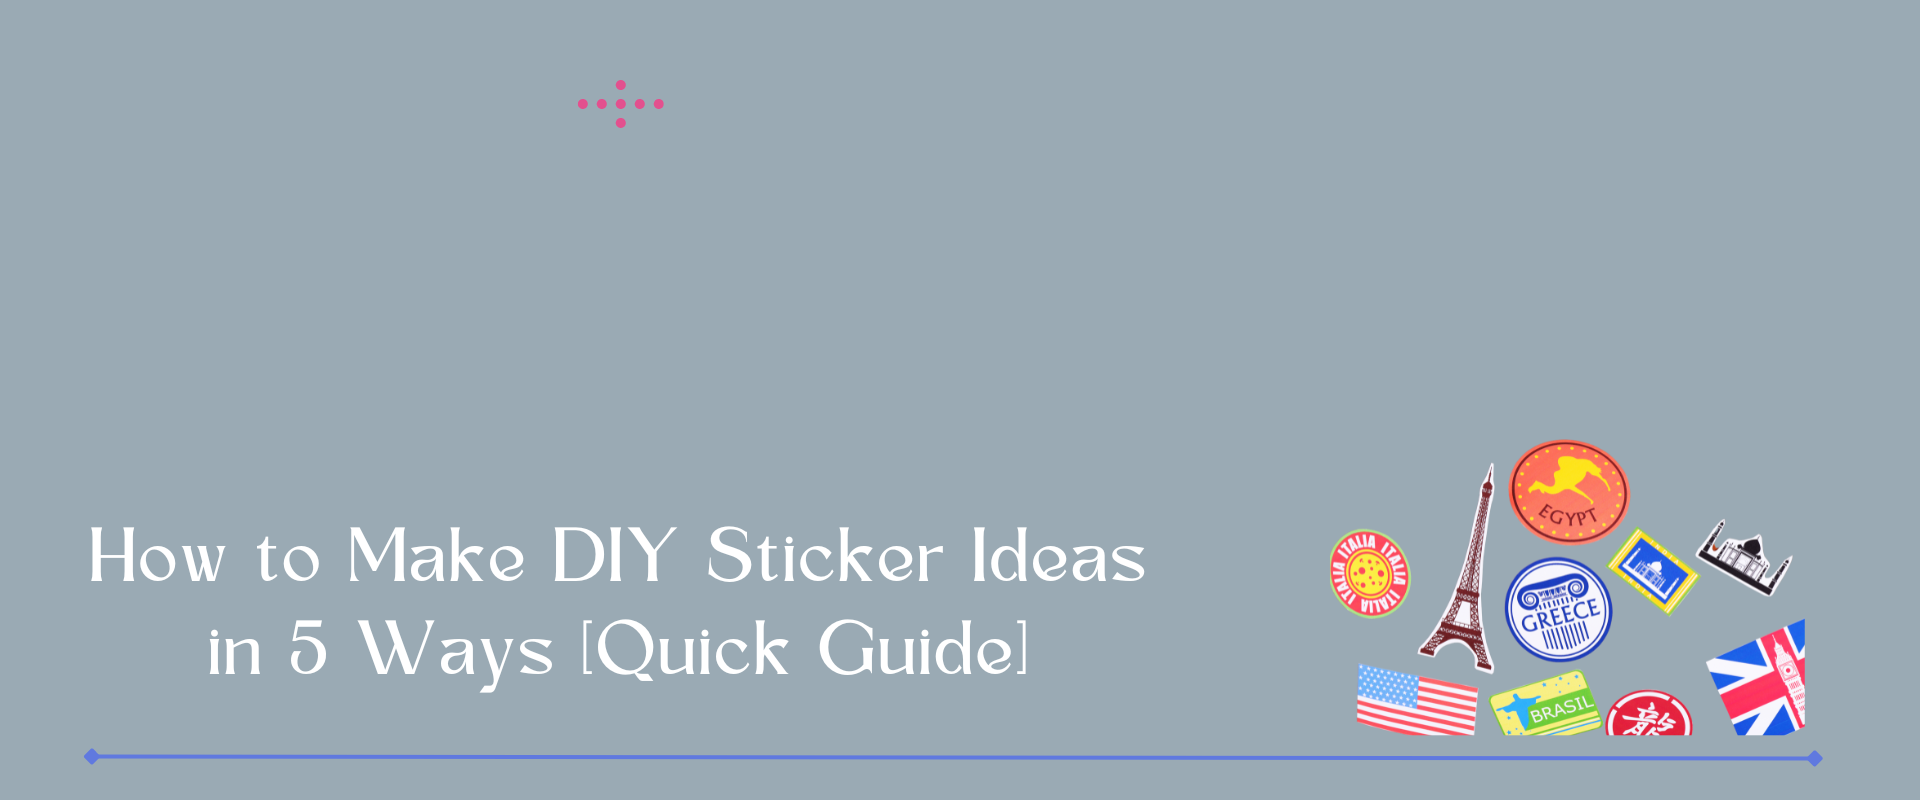 How to Make DIY Sticker Ideas in 5 Ways [Quick Guide]